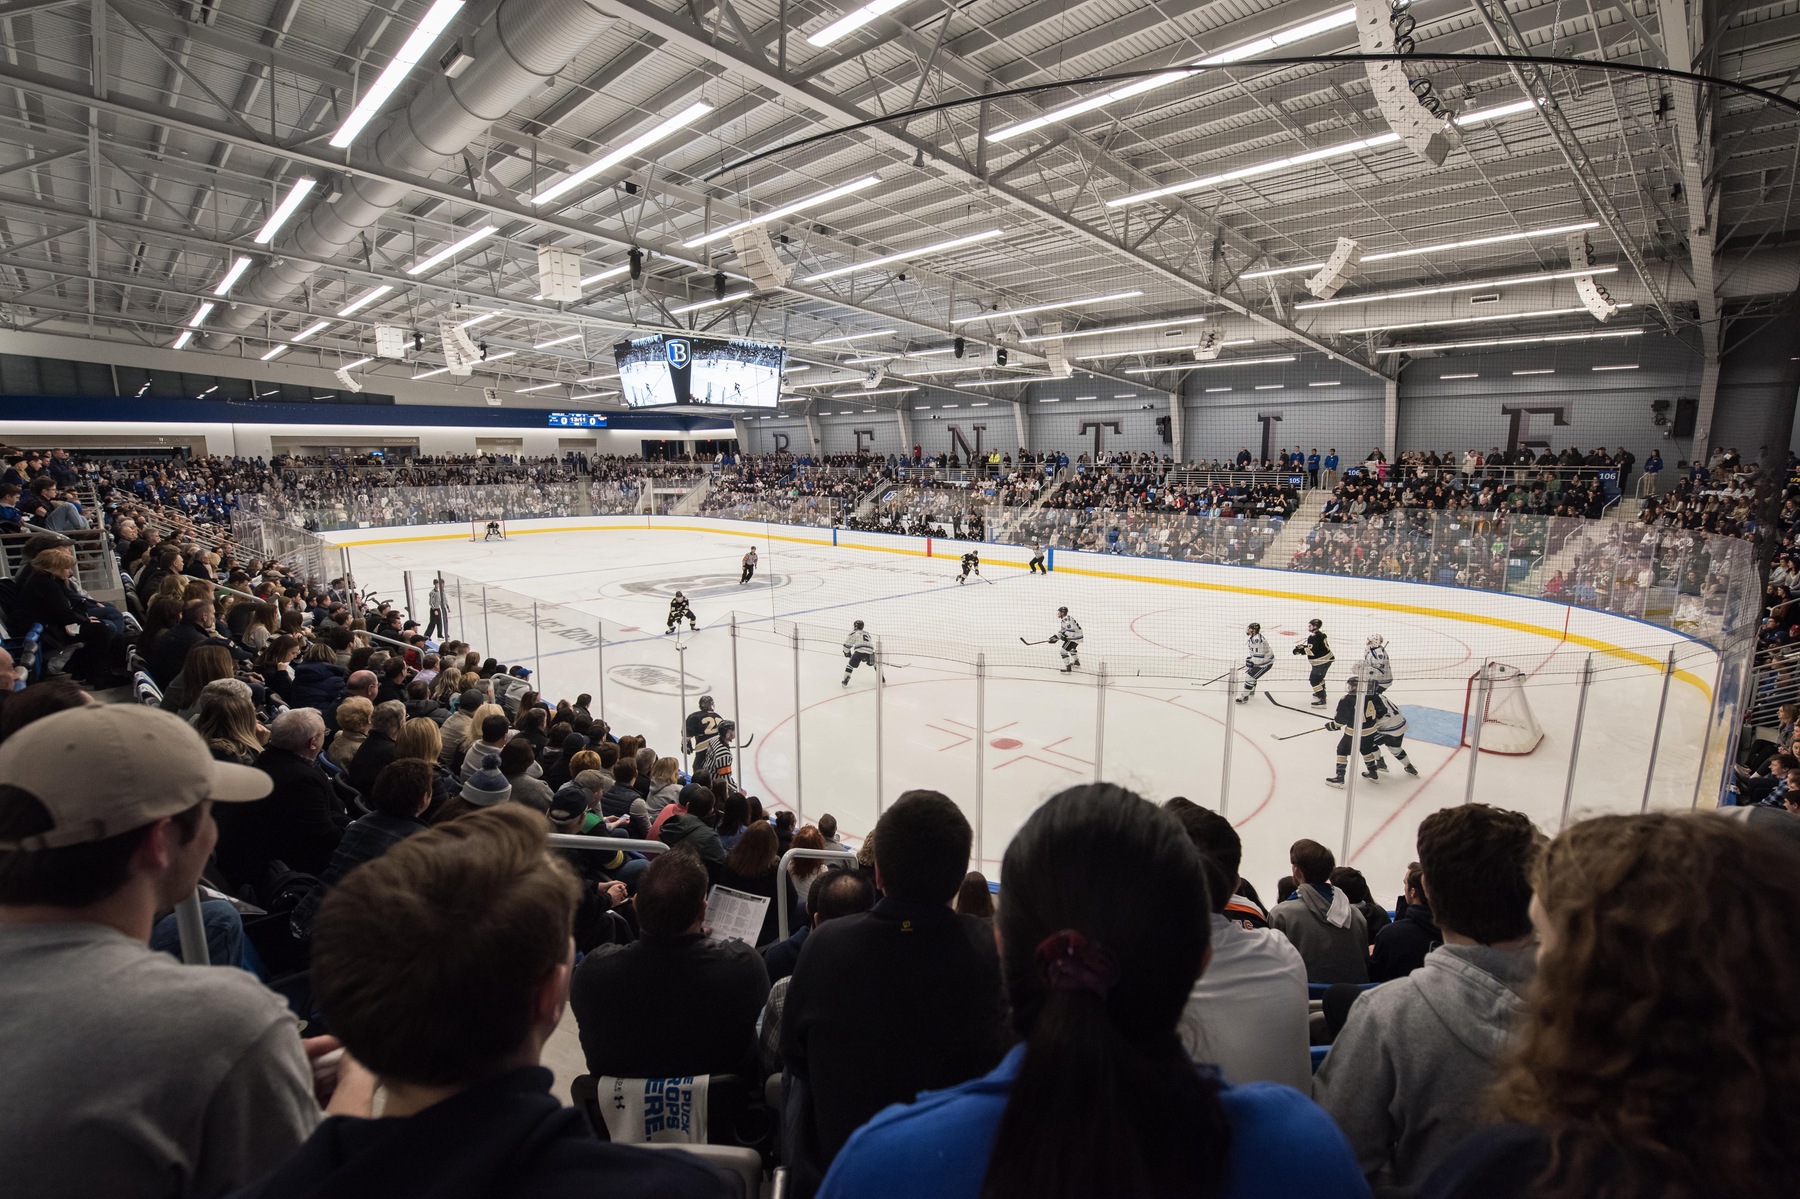 Bentley Hockey Playoff Tickets Go on Sale Monday, March 4 at Noon